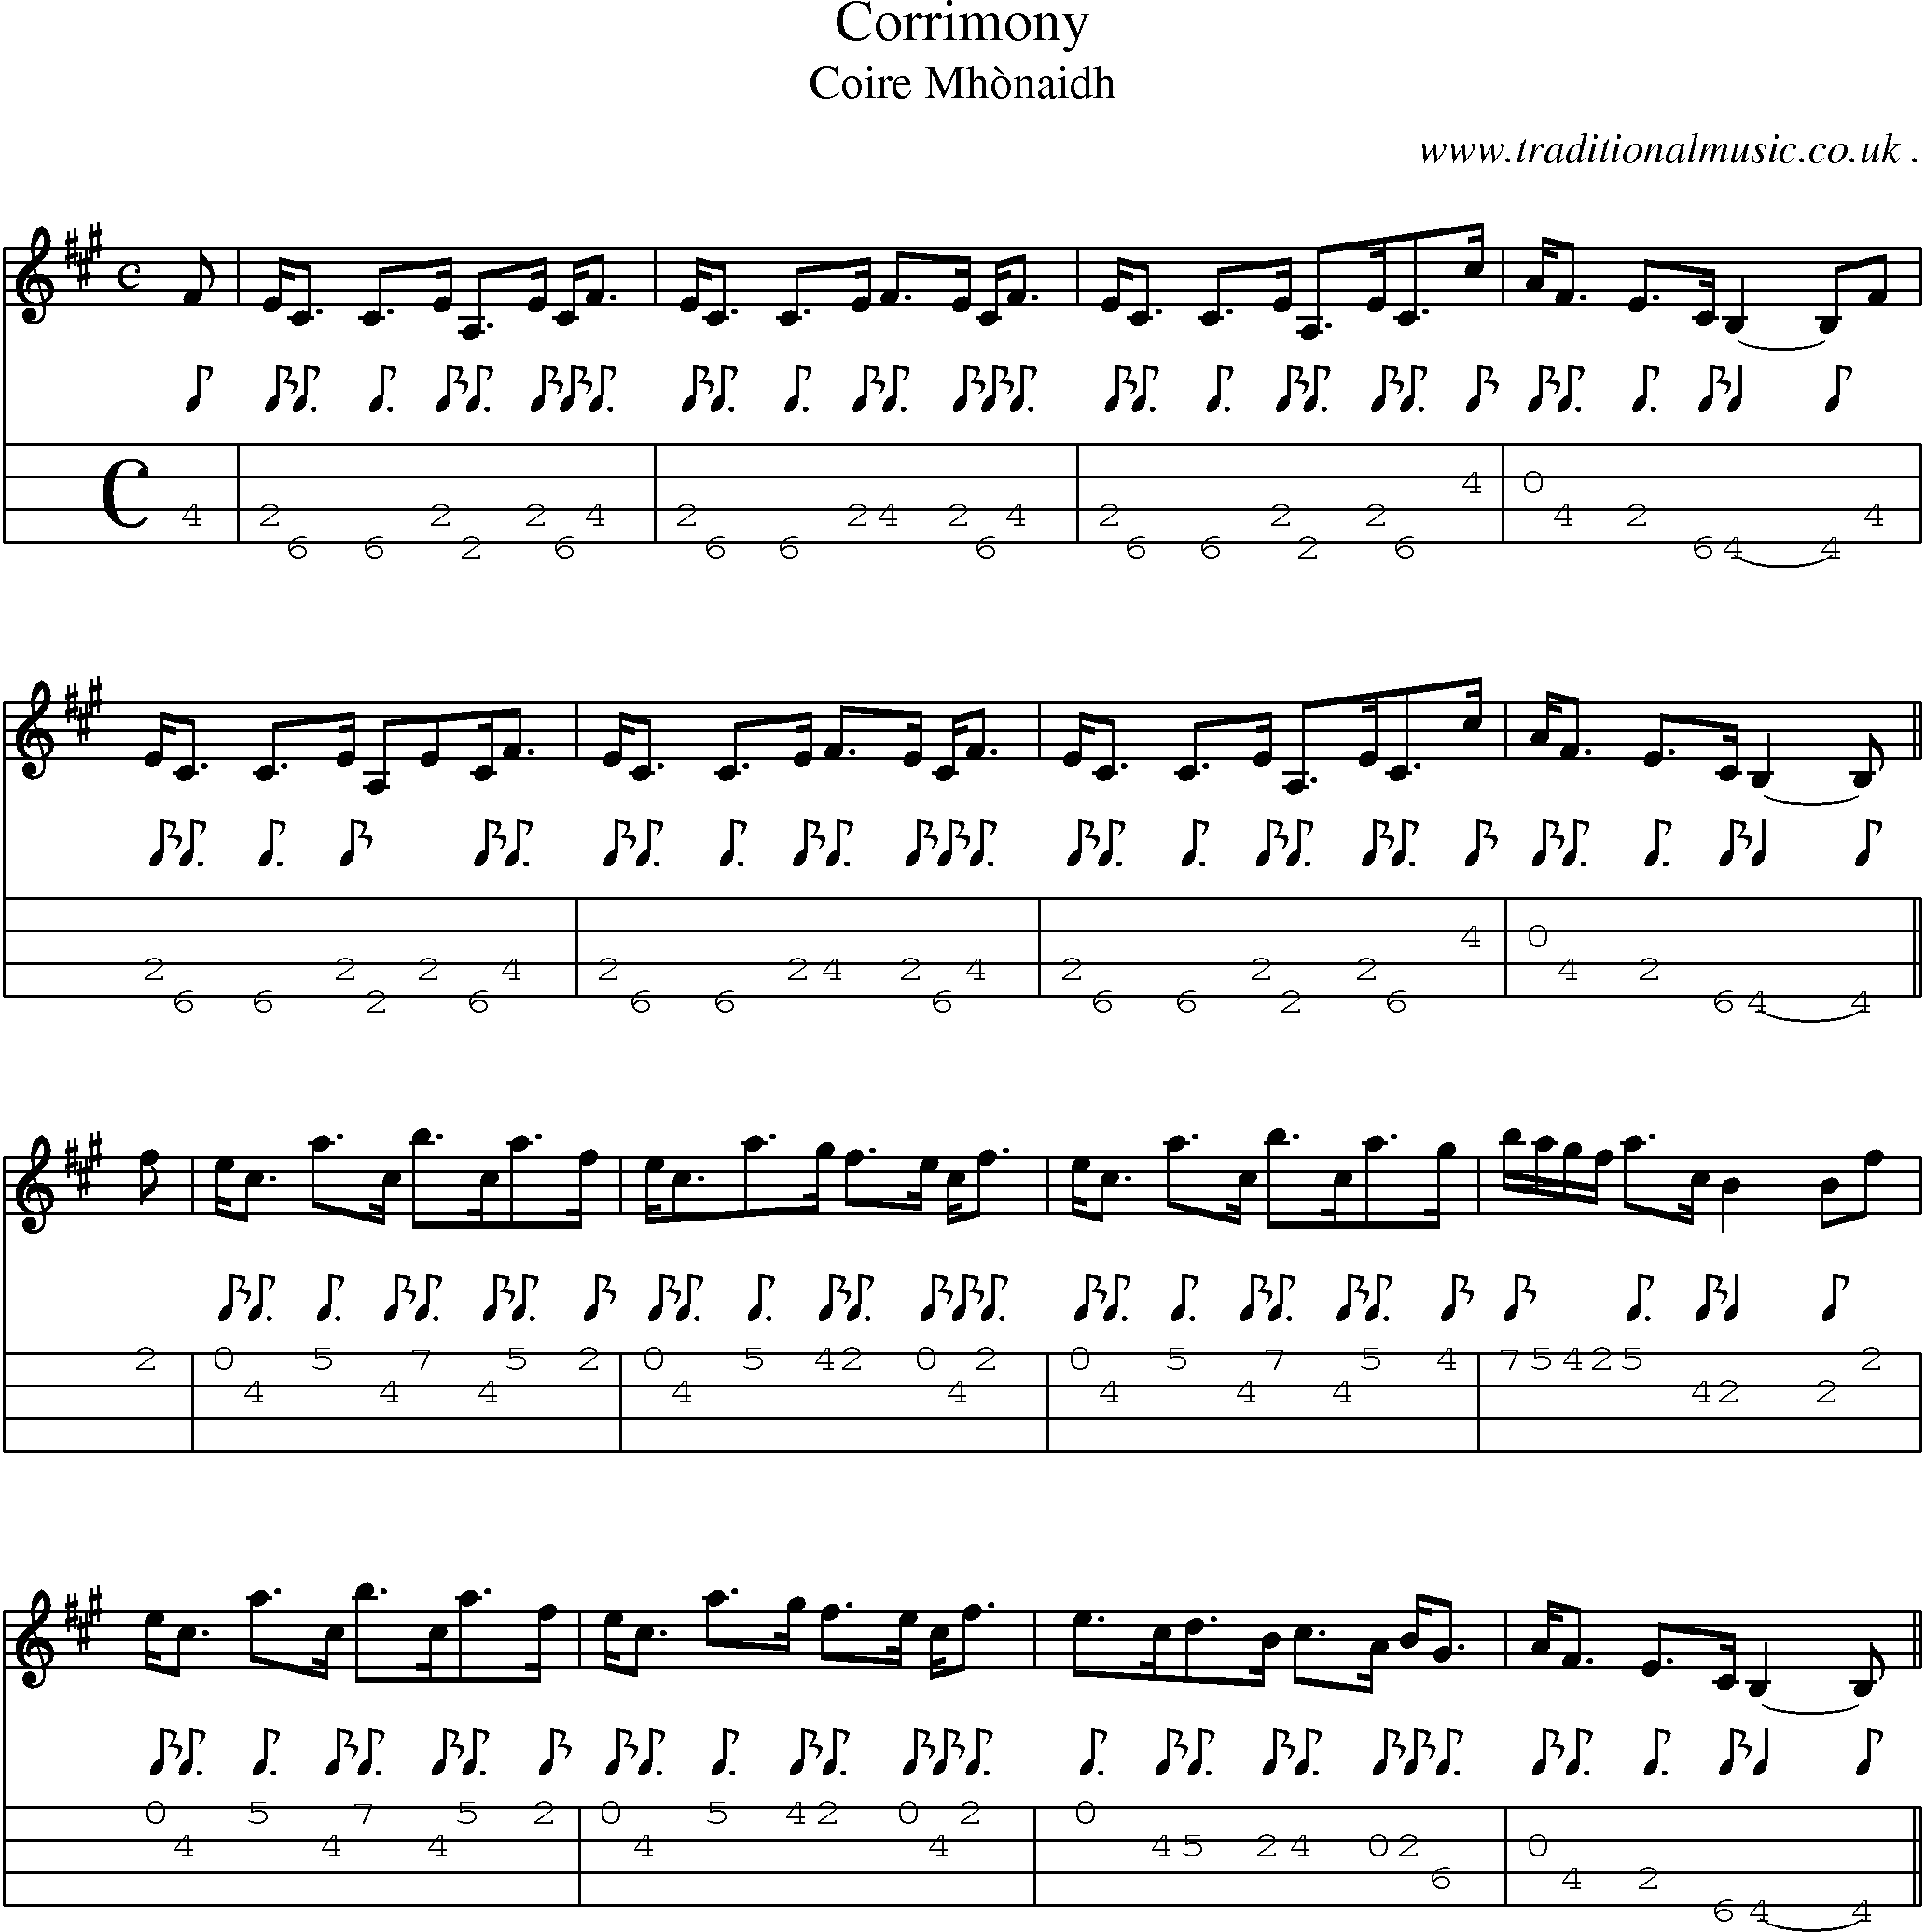 Sheet-music  score, Chords and Mandolin Tabs for Corrimony